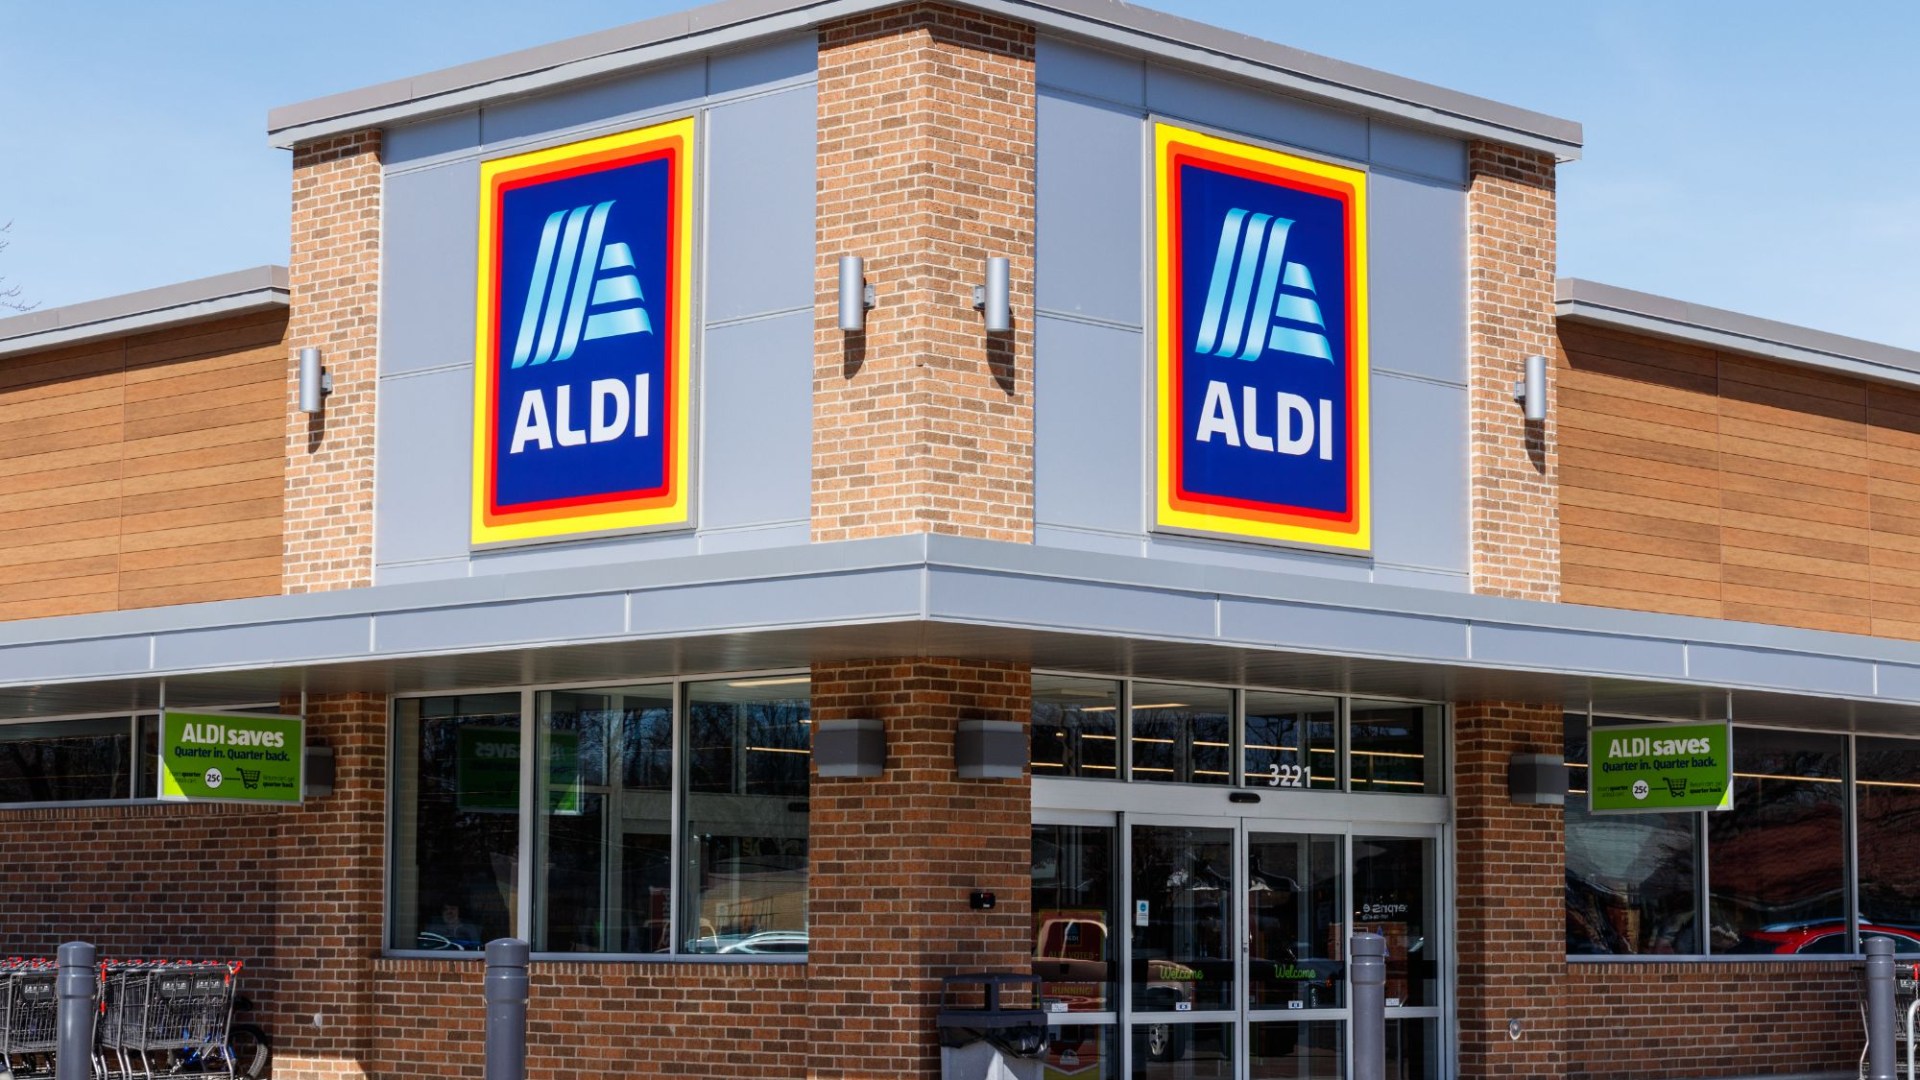 ‘Absolute life saver’, Aldi shoppers rave over return of popular kids item £10 cheaper than Boots